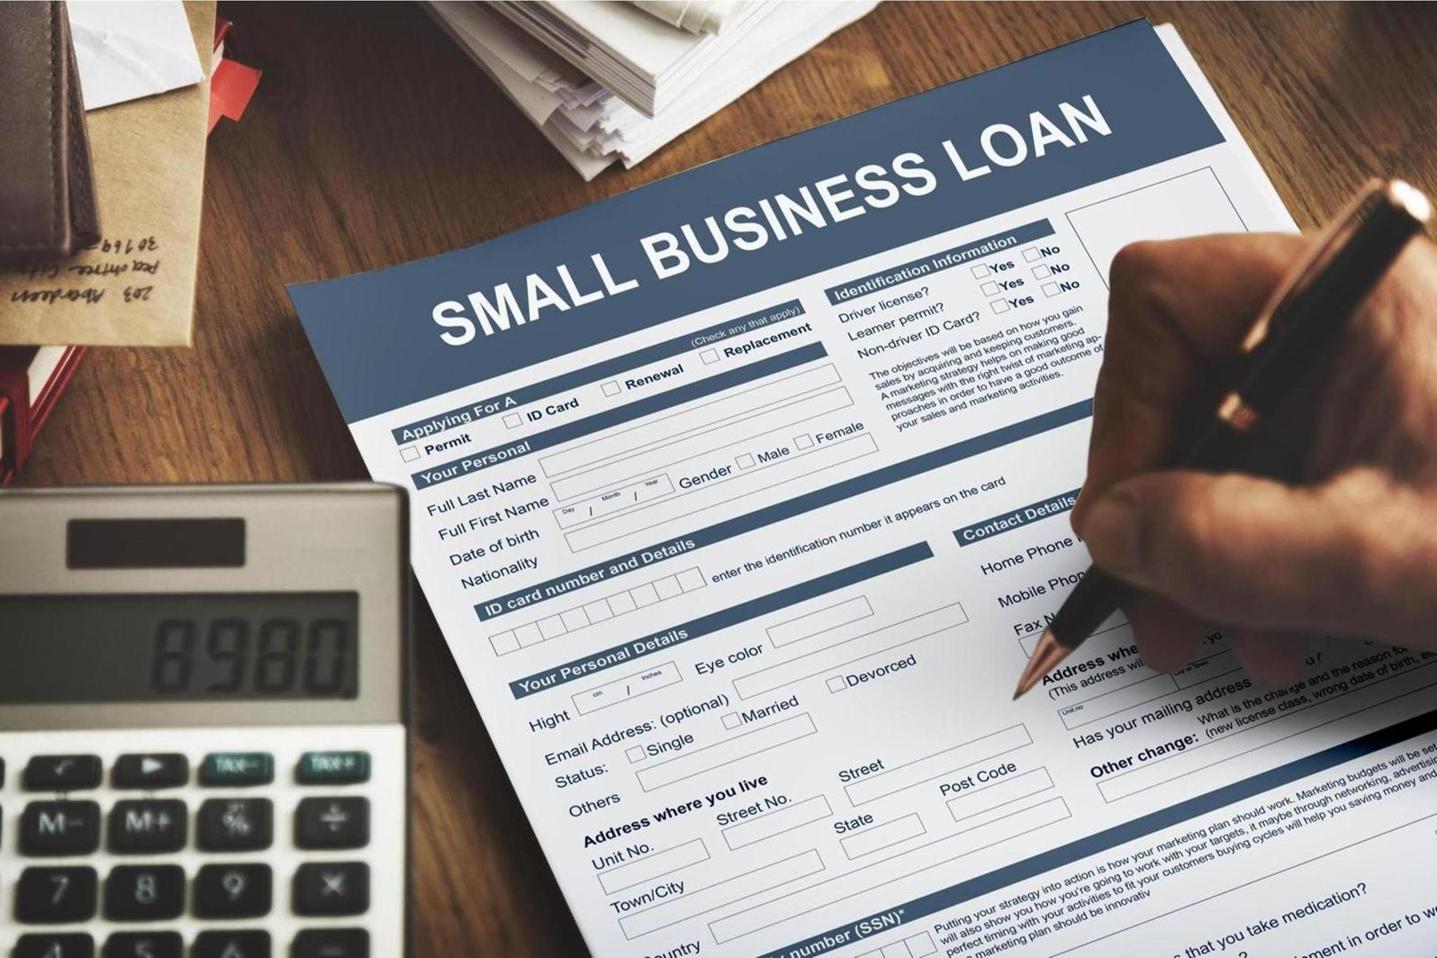 TipMe Liberia Announces Issuance of Small Business Loans Through OYA Microcredit